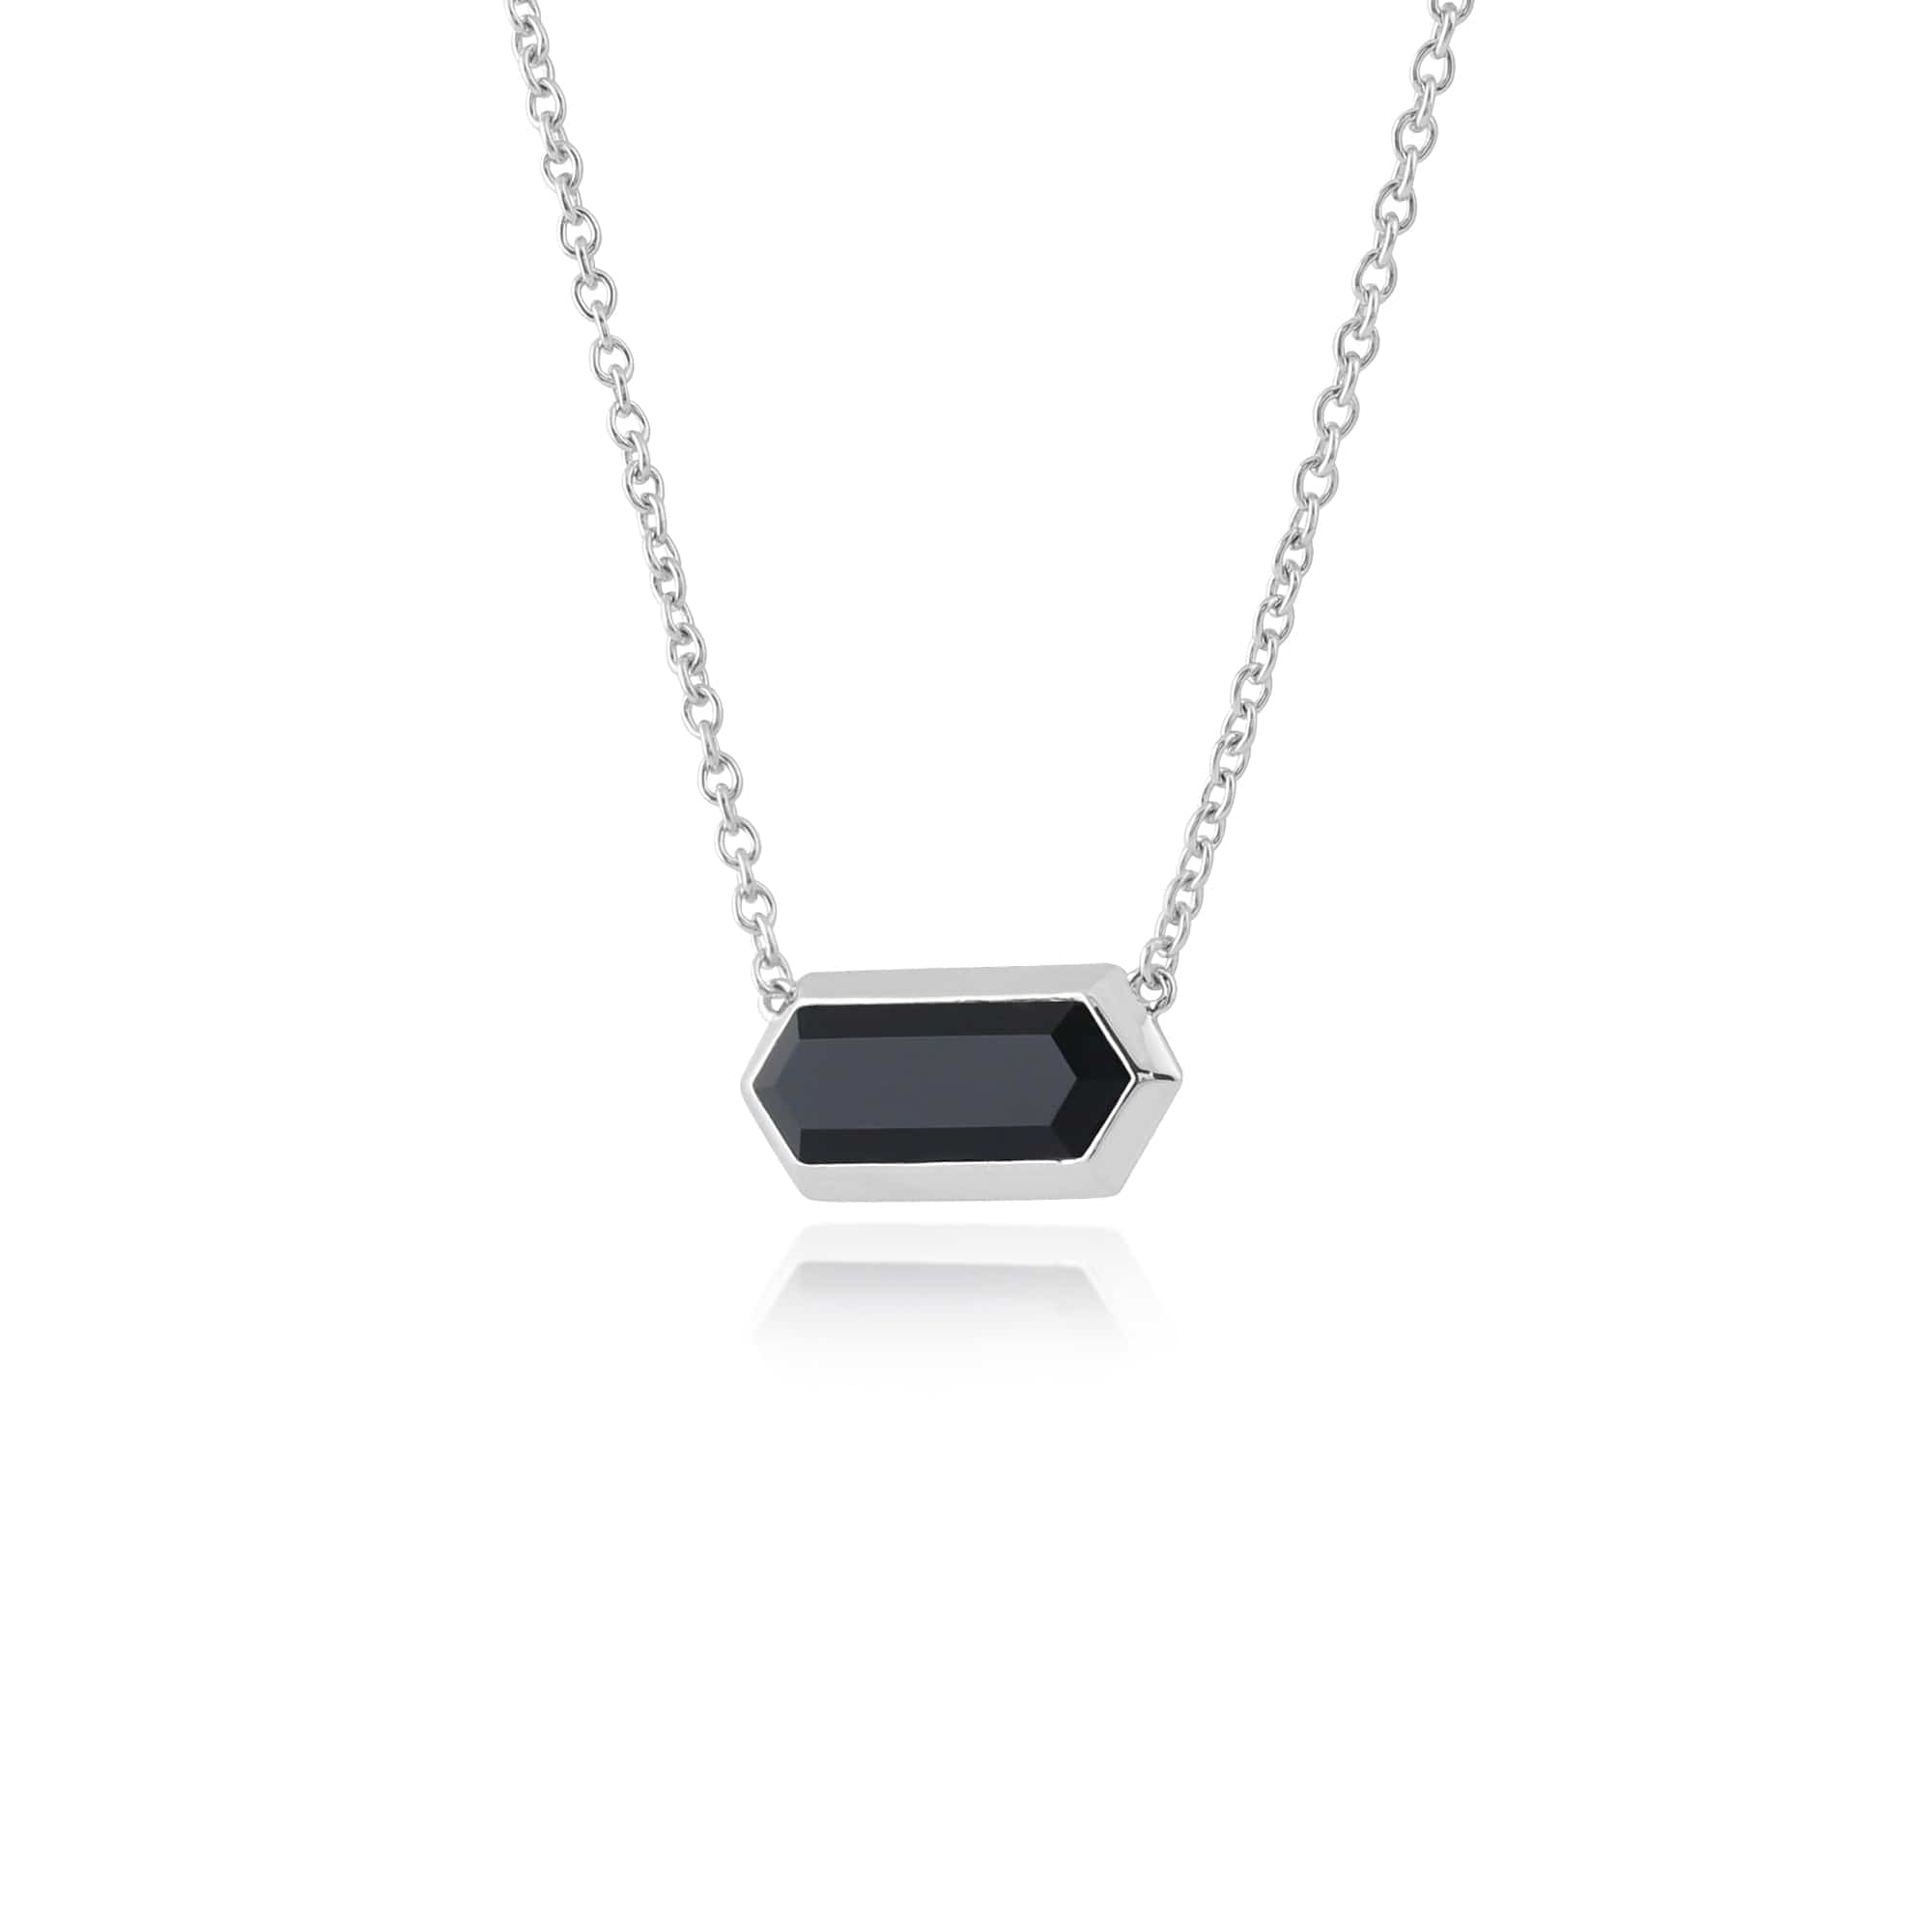 Geometric Hexagon Black Onyx Prism Necklace in Sterling Silver